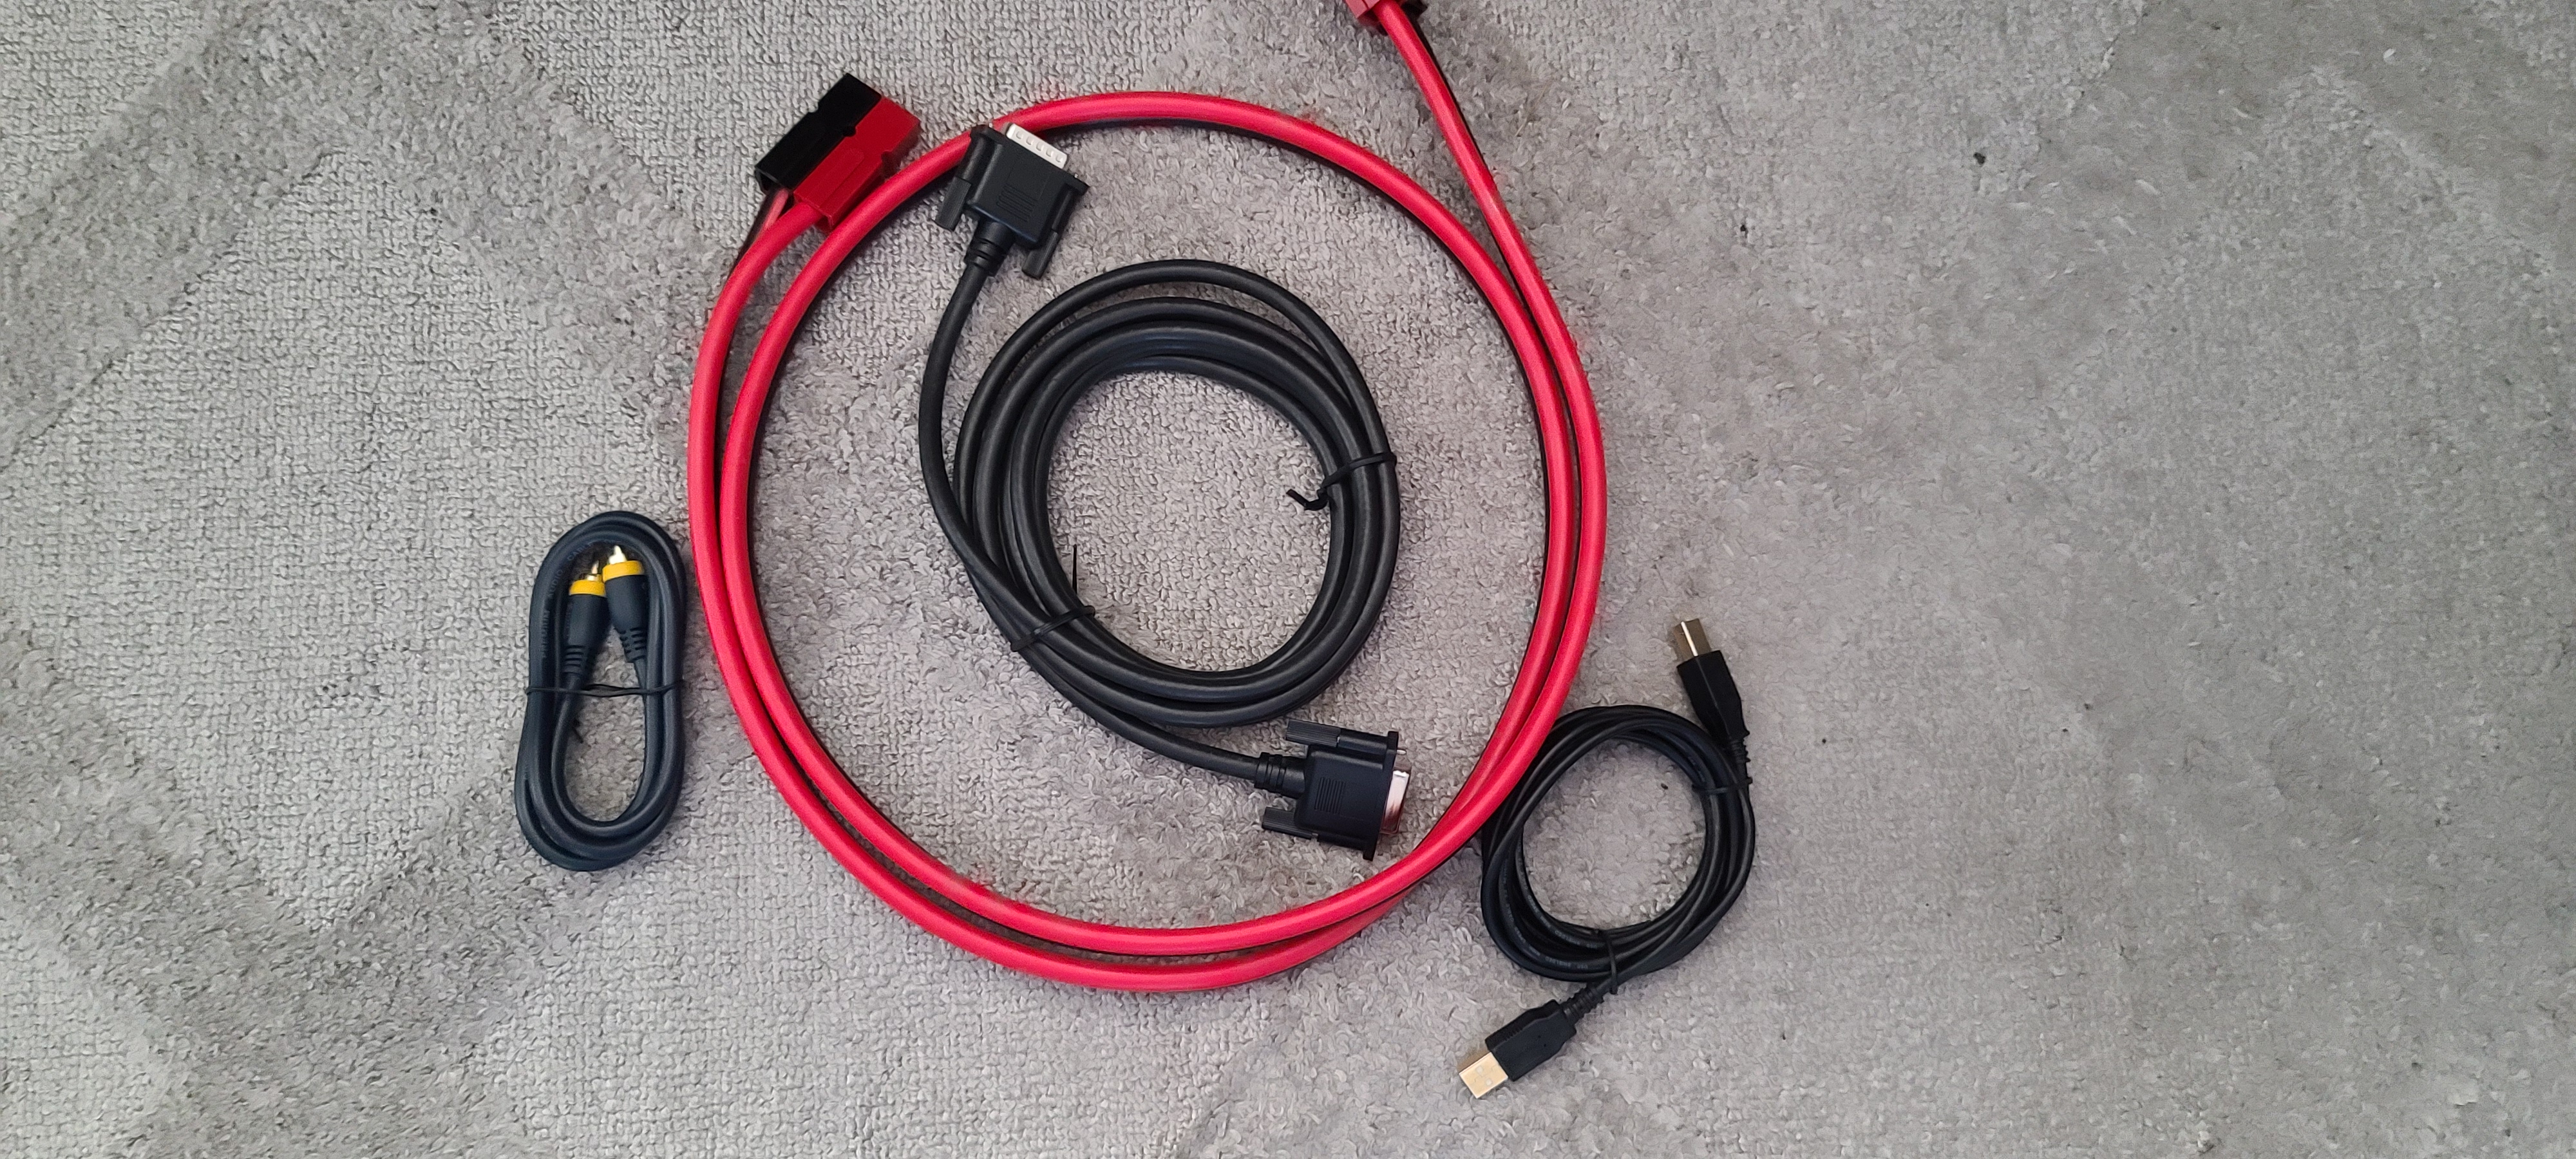 KPA1500 Cables